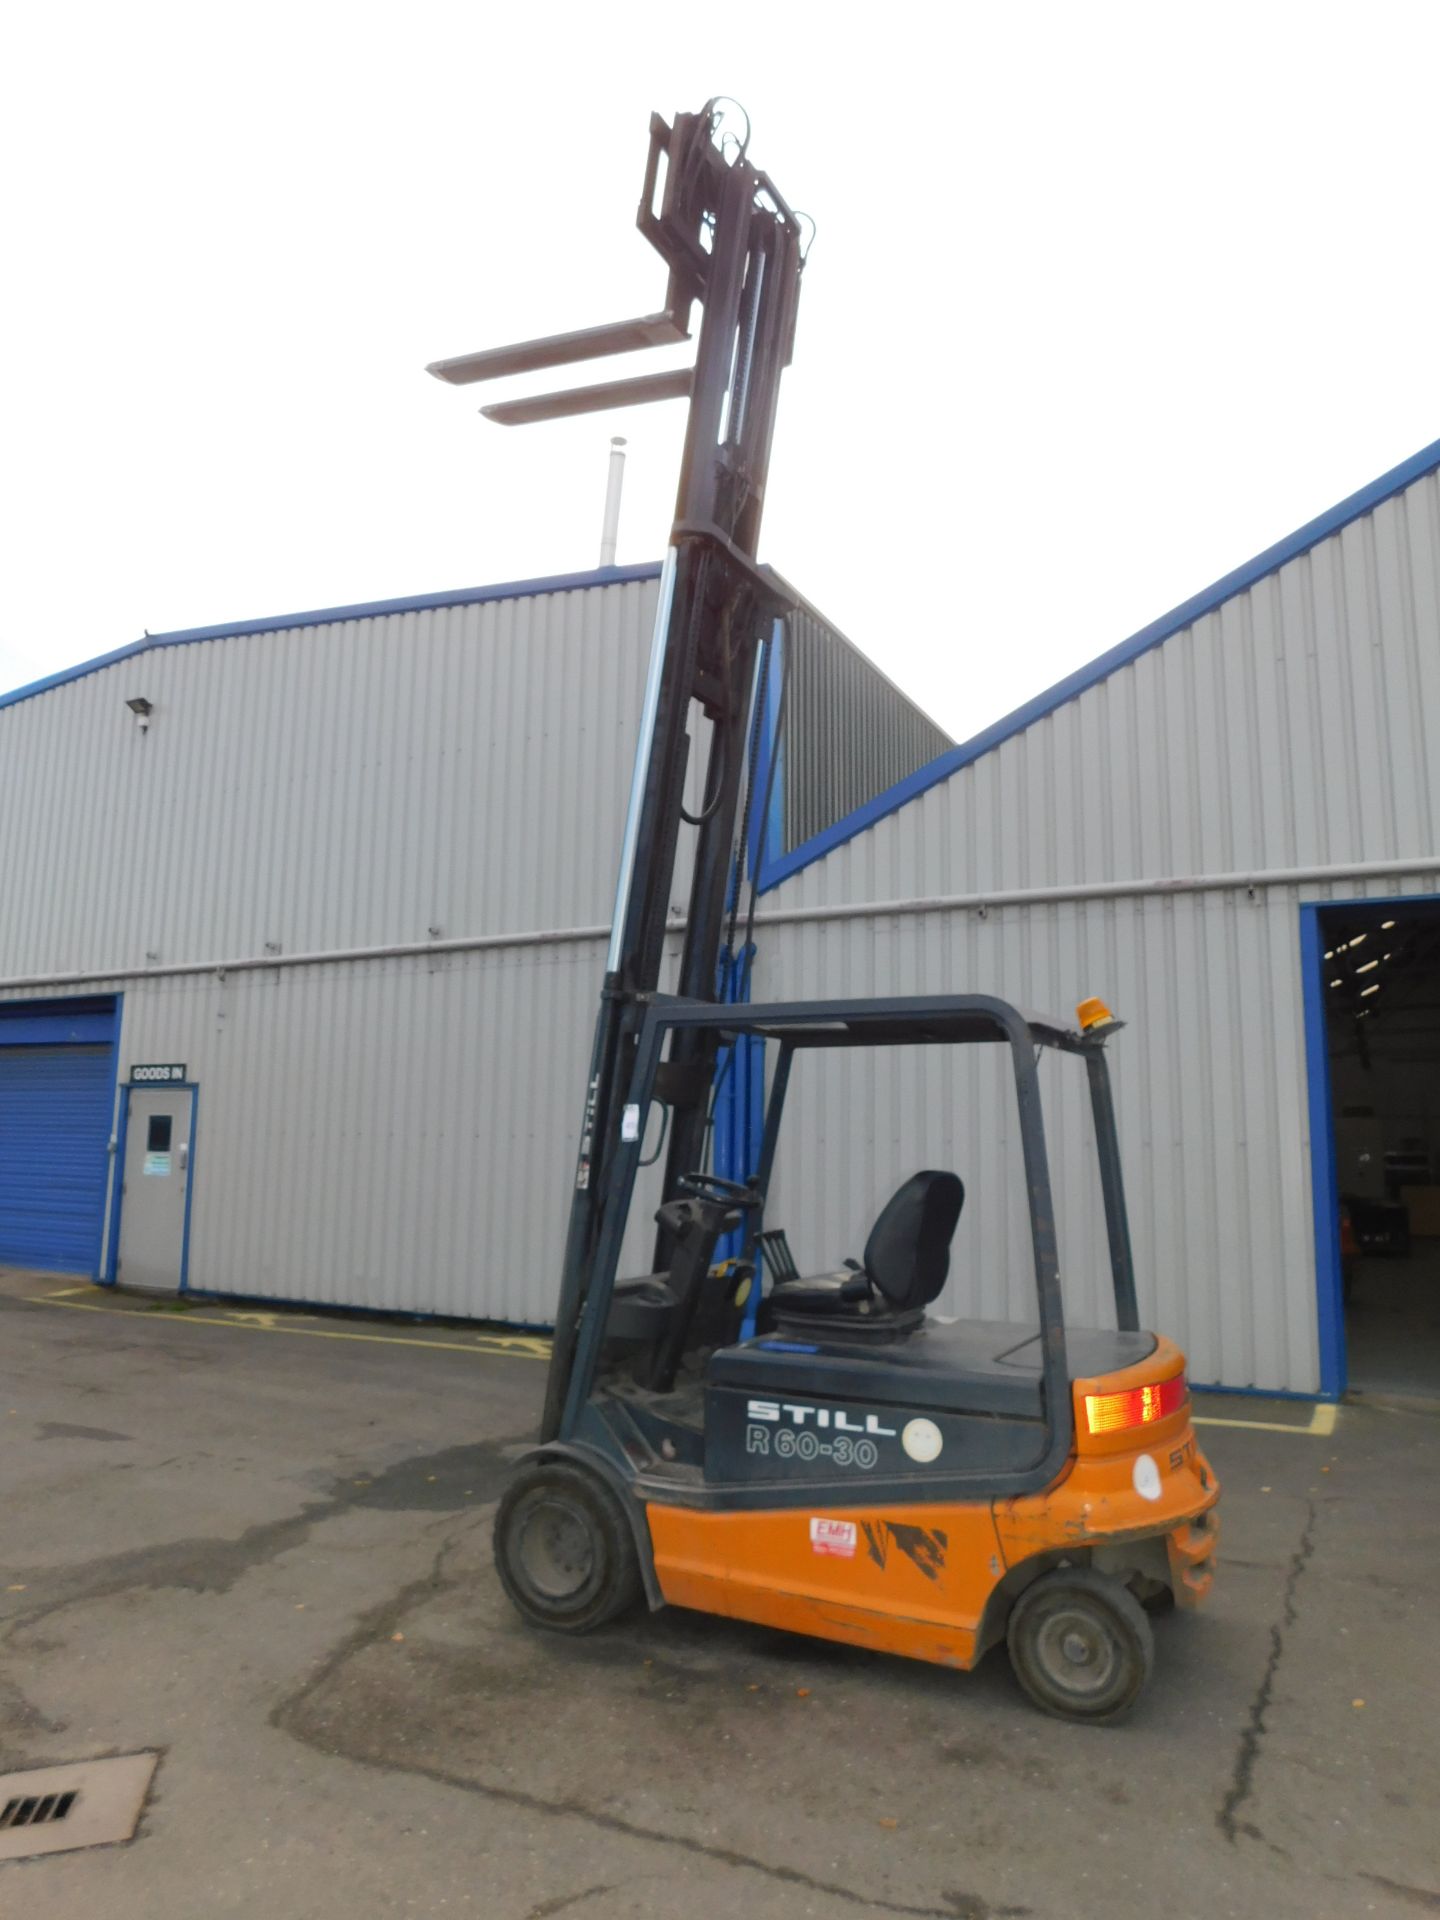 STILL R60-30 Electric Forklift Truck, Serial Number: 6025009705, 3000kg Capacity with Charger ( - Image 12 of 12